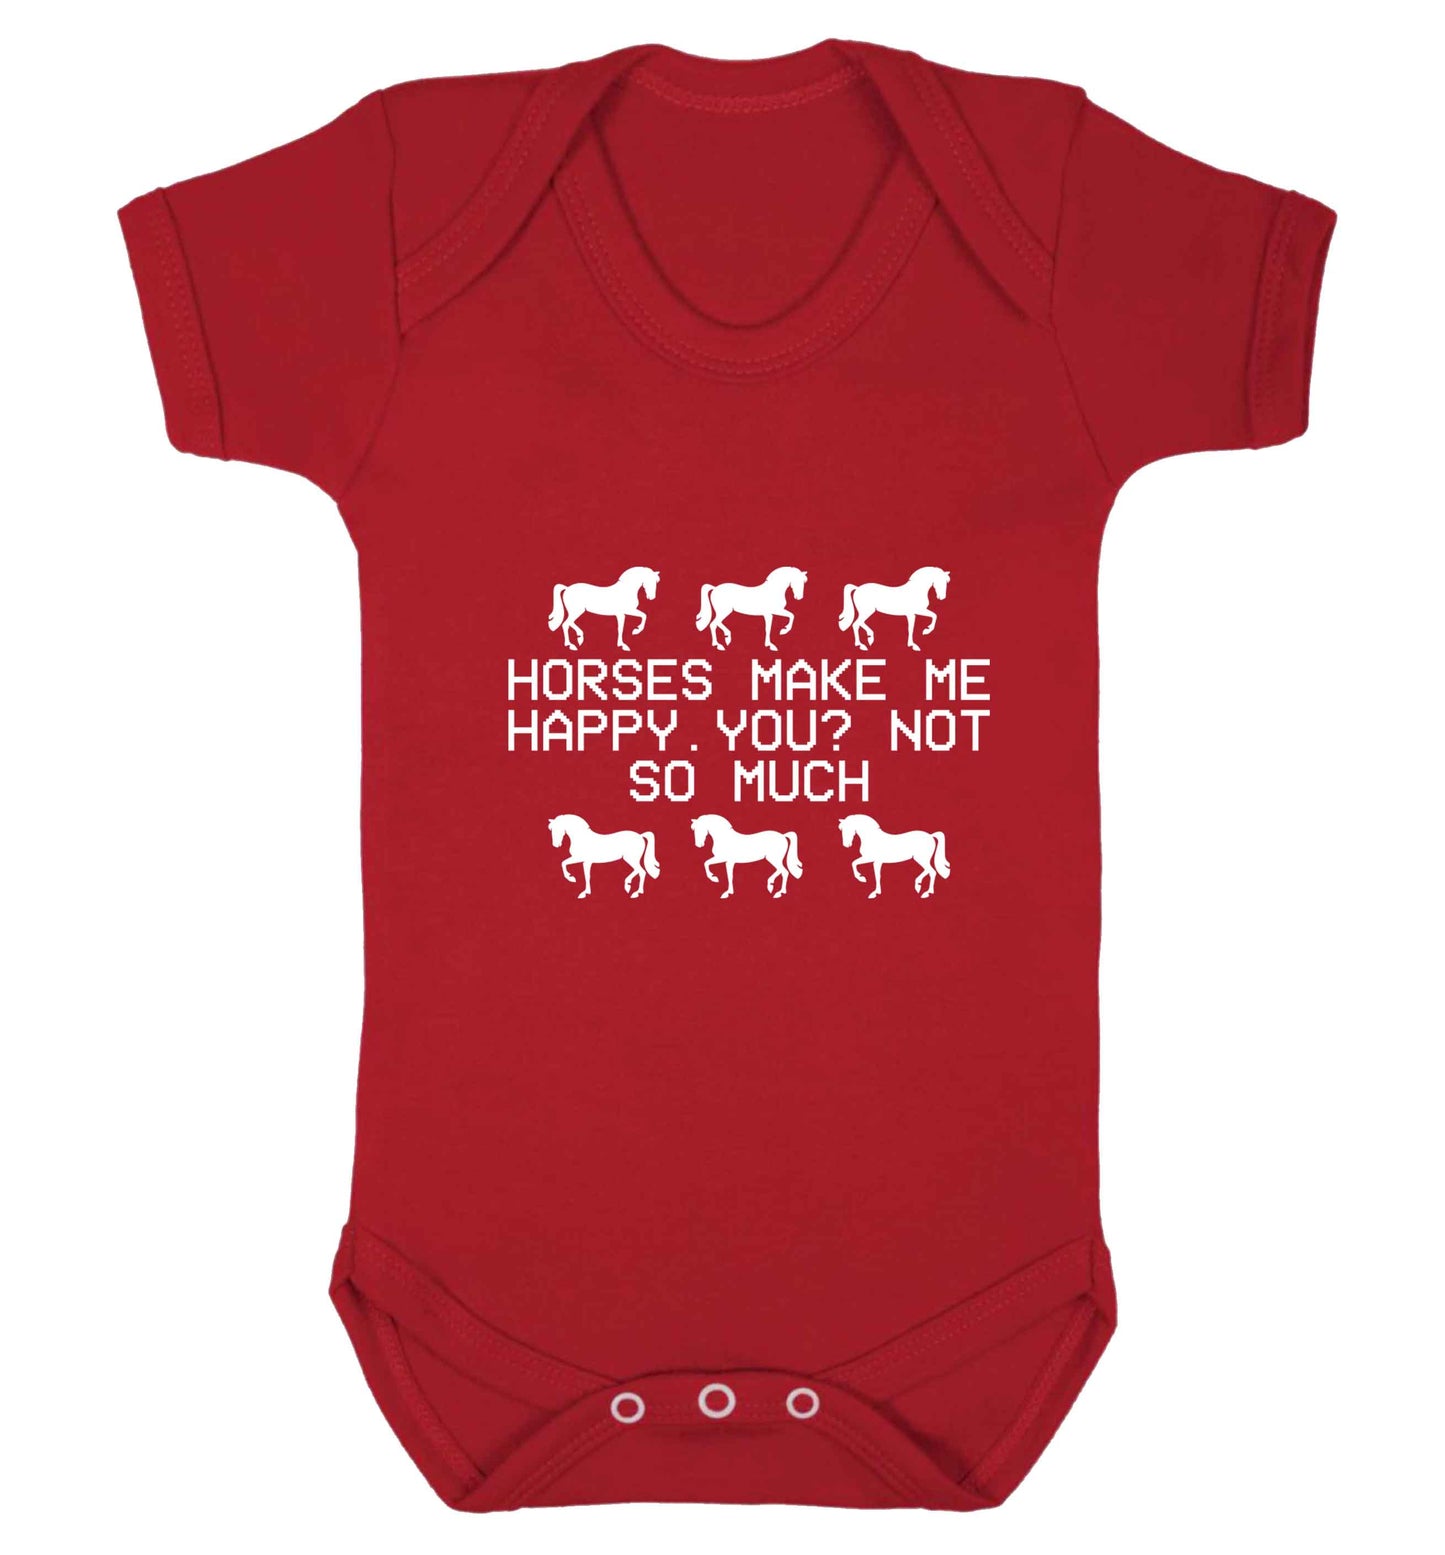 Horses make me happy, you not so much baby vest red 18-24 months